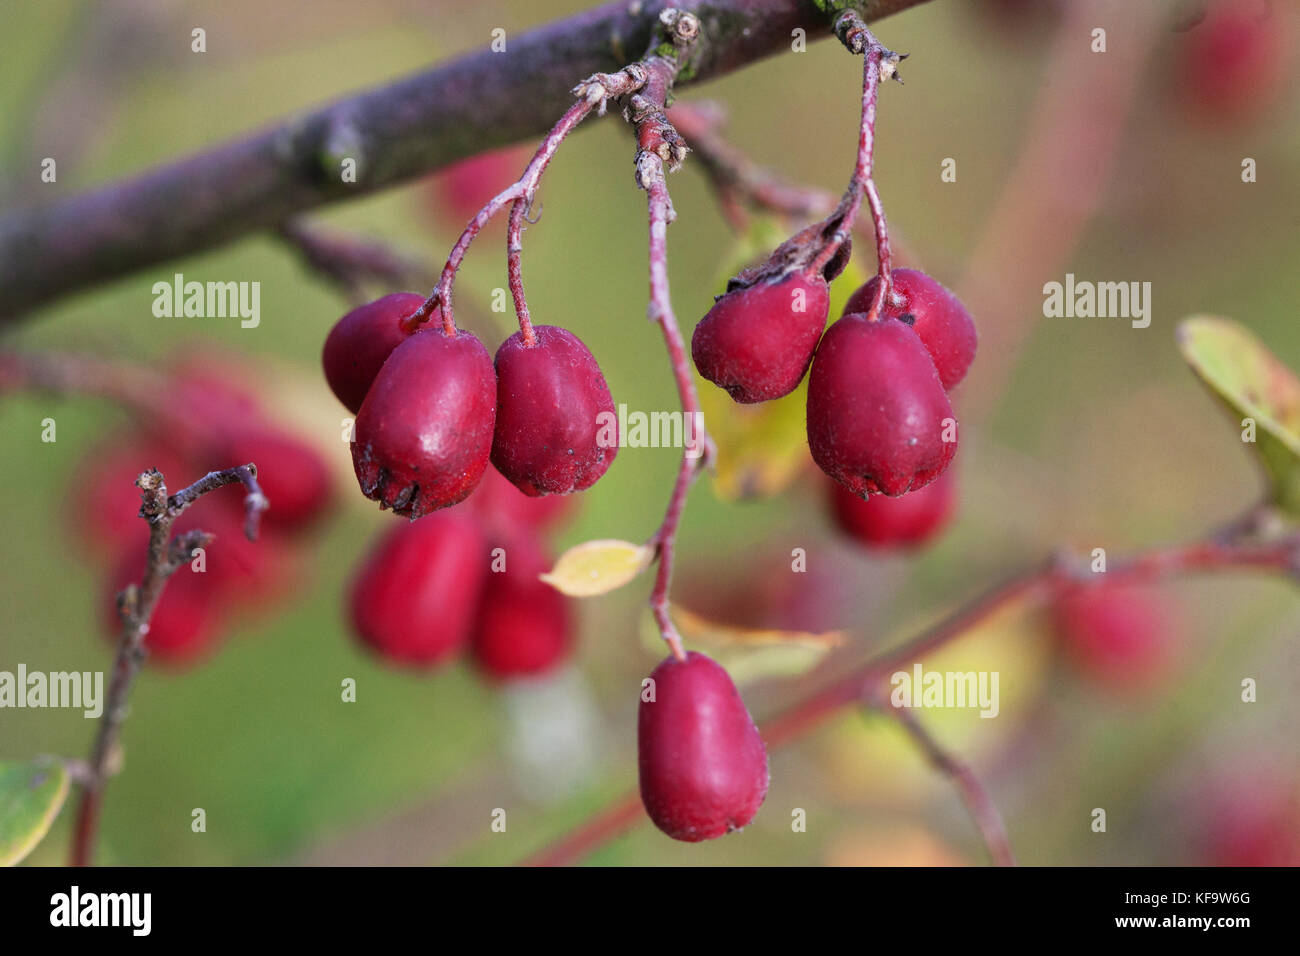 Cotoneaster gracilis red berries, fruits on branch, shrub in autumn Cotoneaster berries Stock Photo